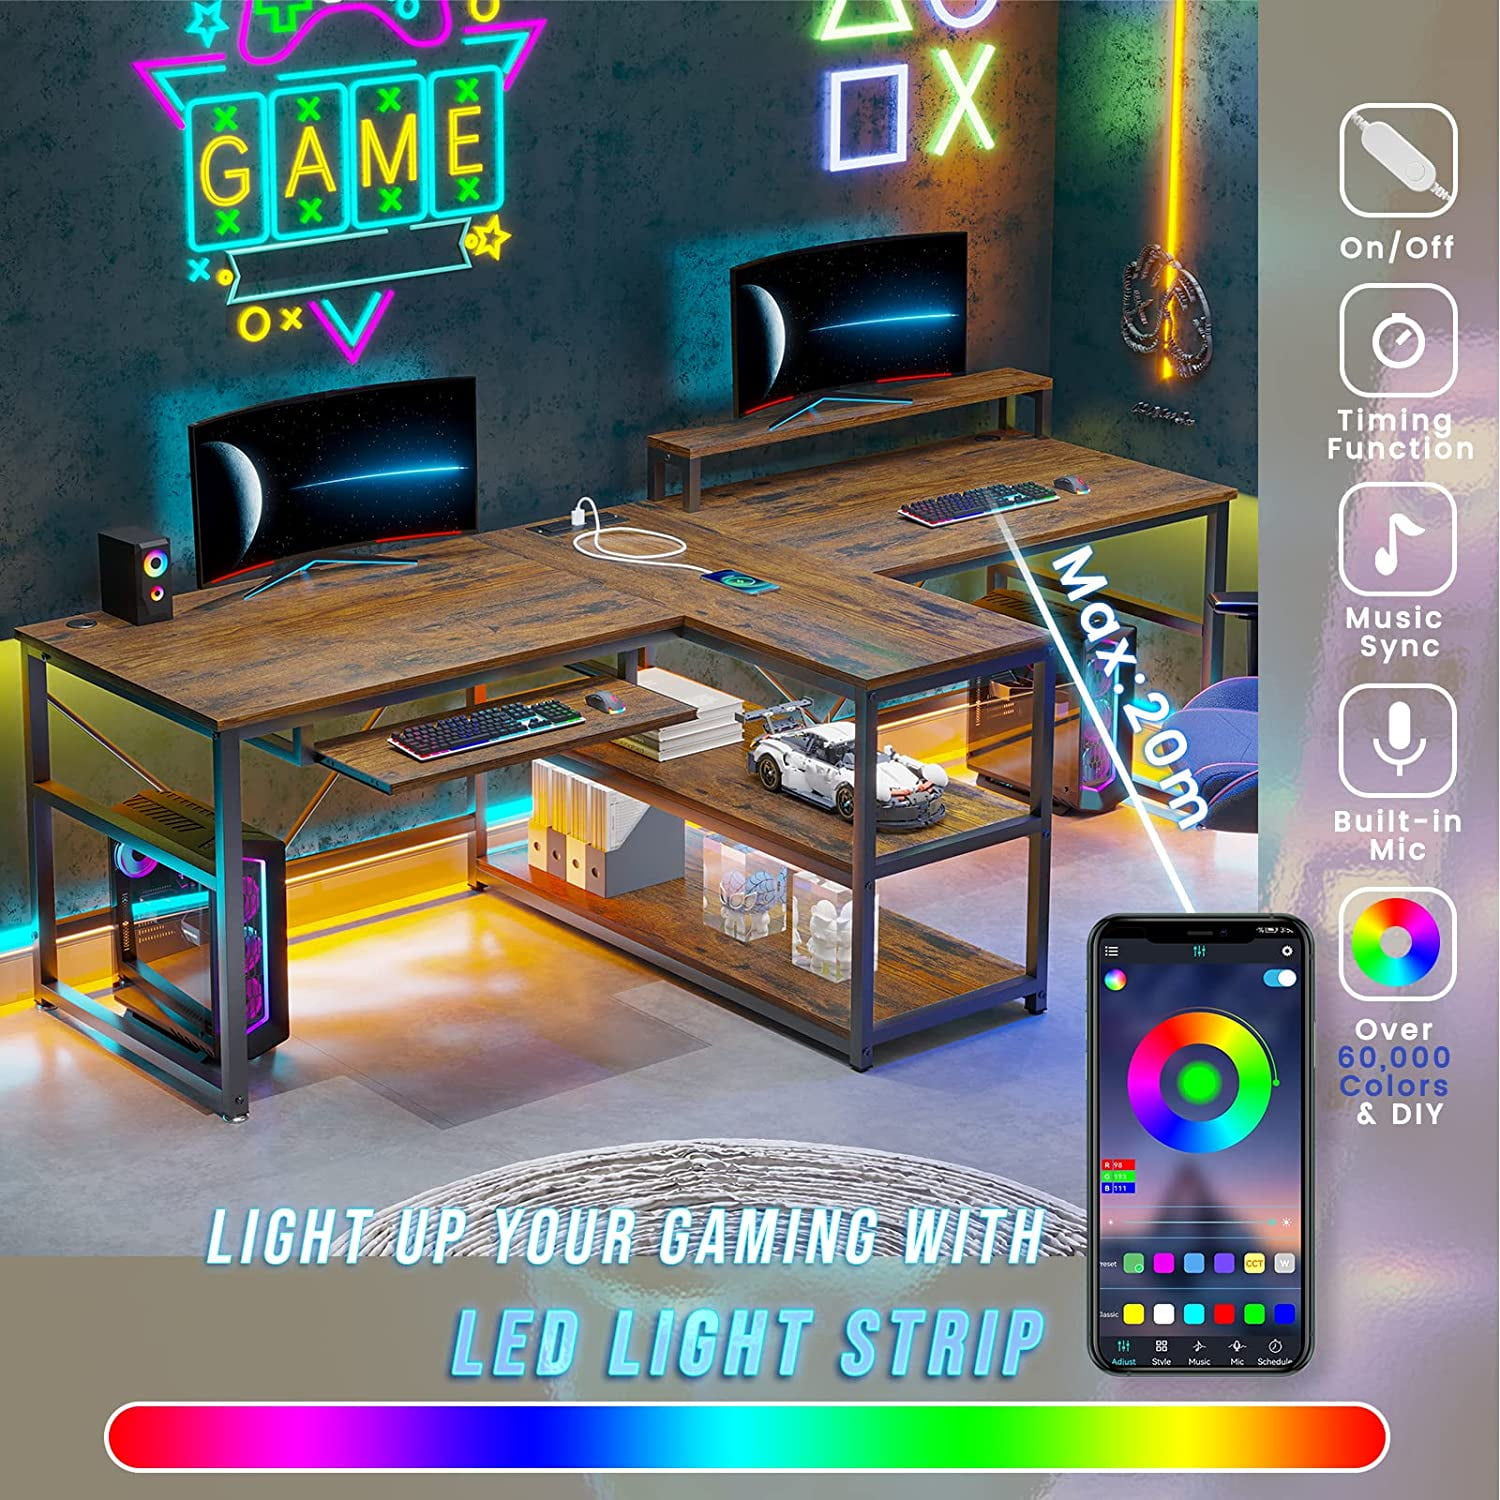 Gaming table lighting?? I want to get some cool overhead light for